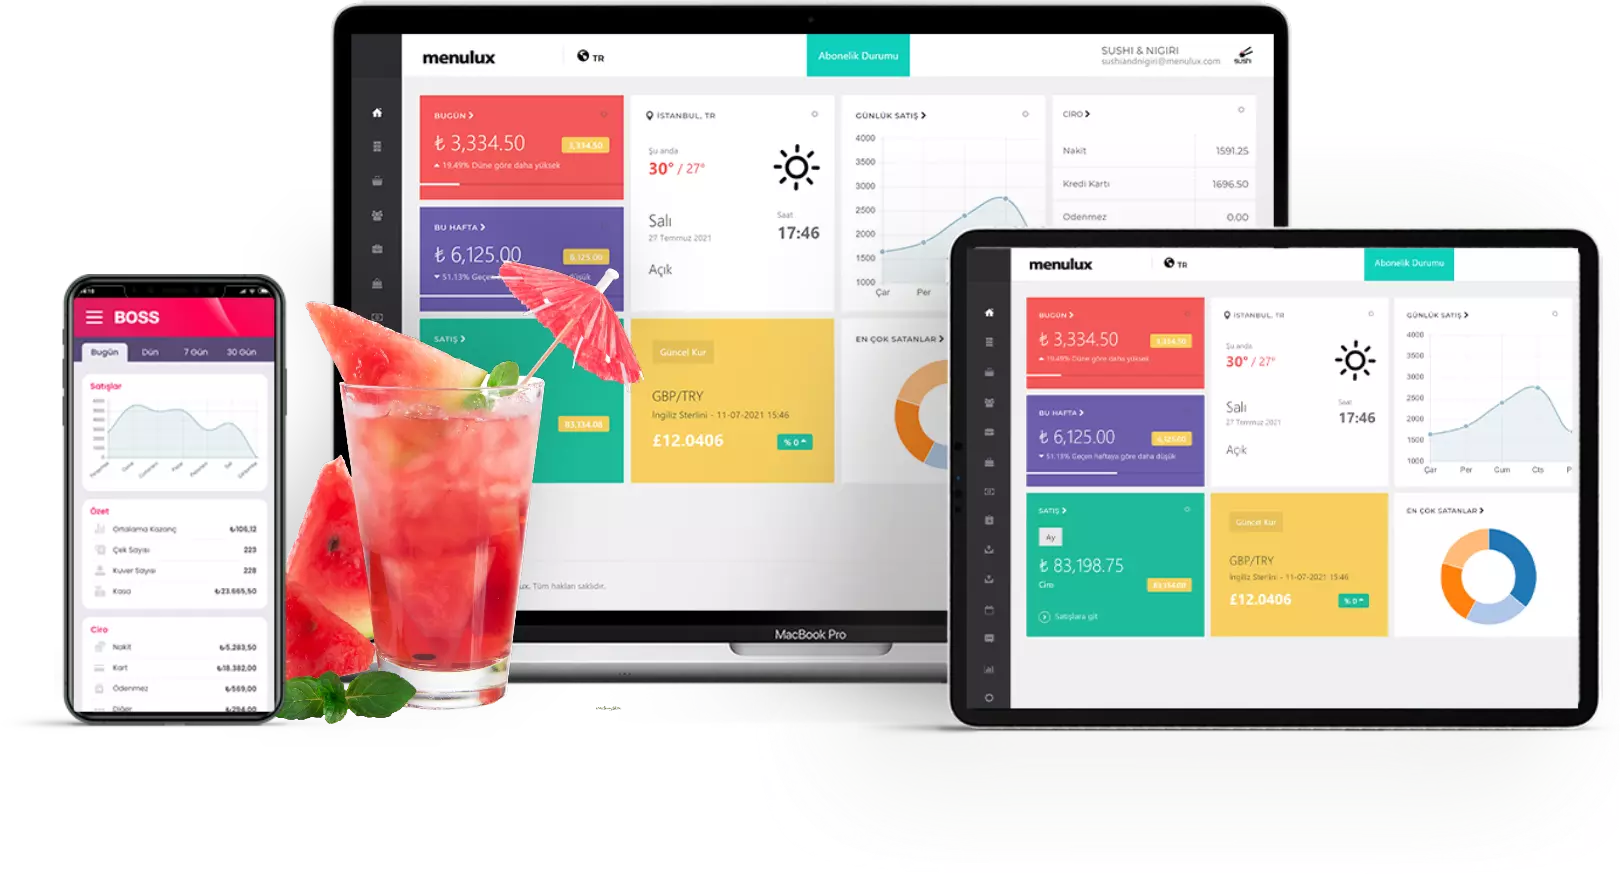 Menulux Restaurant POS Systems and Central Management